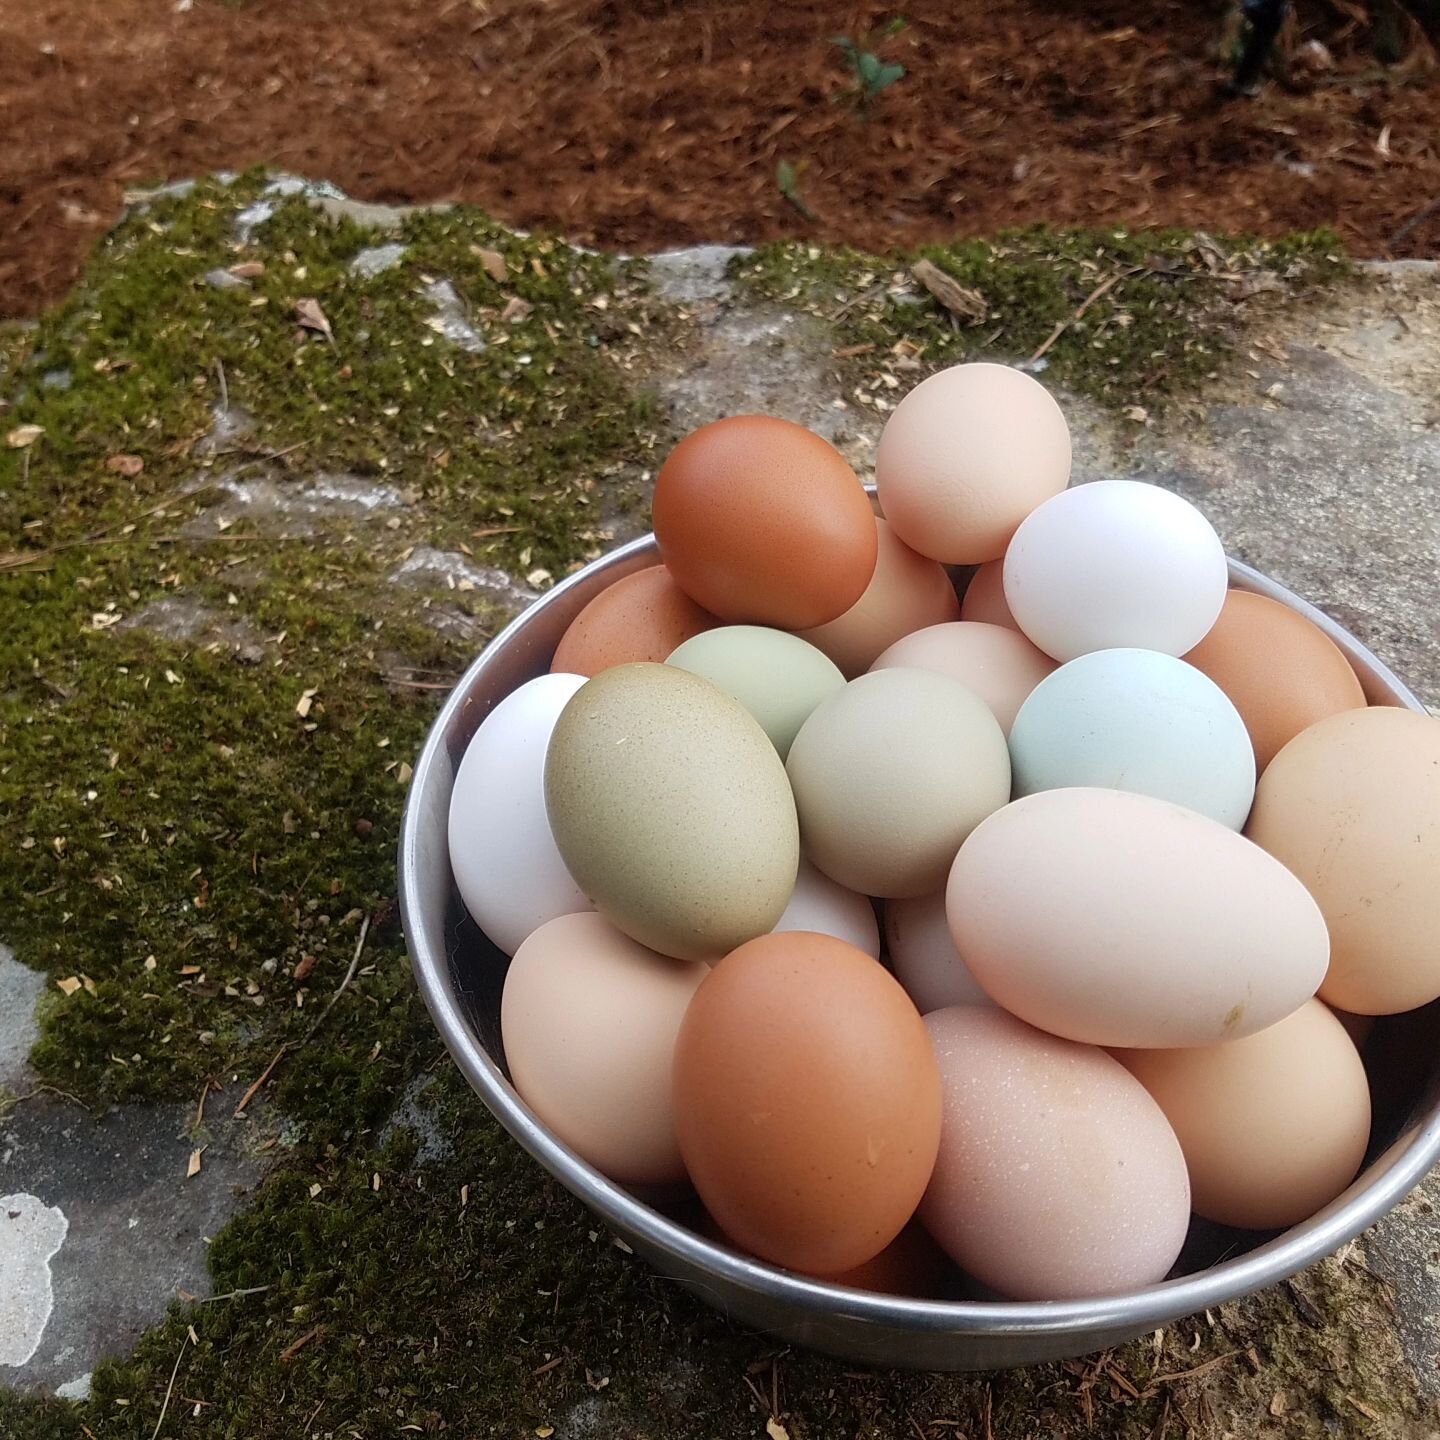 ❔🥚Did you know that having a colorful &amp; diverse egg basket is a thing among chicken owners? One of the great joys I have in curating our flock of chickens is picking chickens based on the color of egg they will lay. Green, blue, dark brown, crea